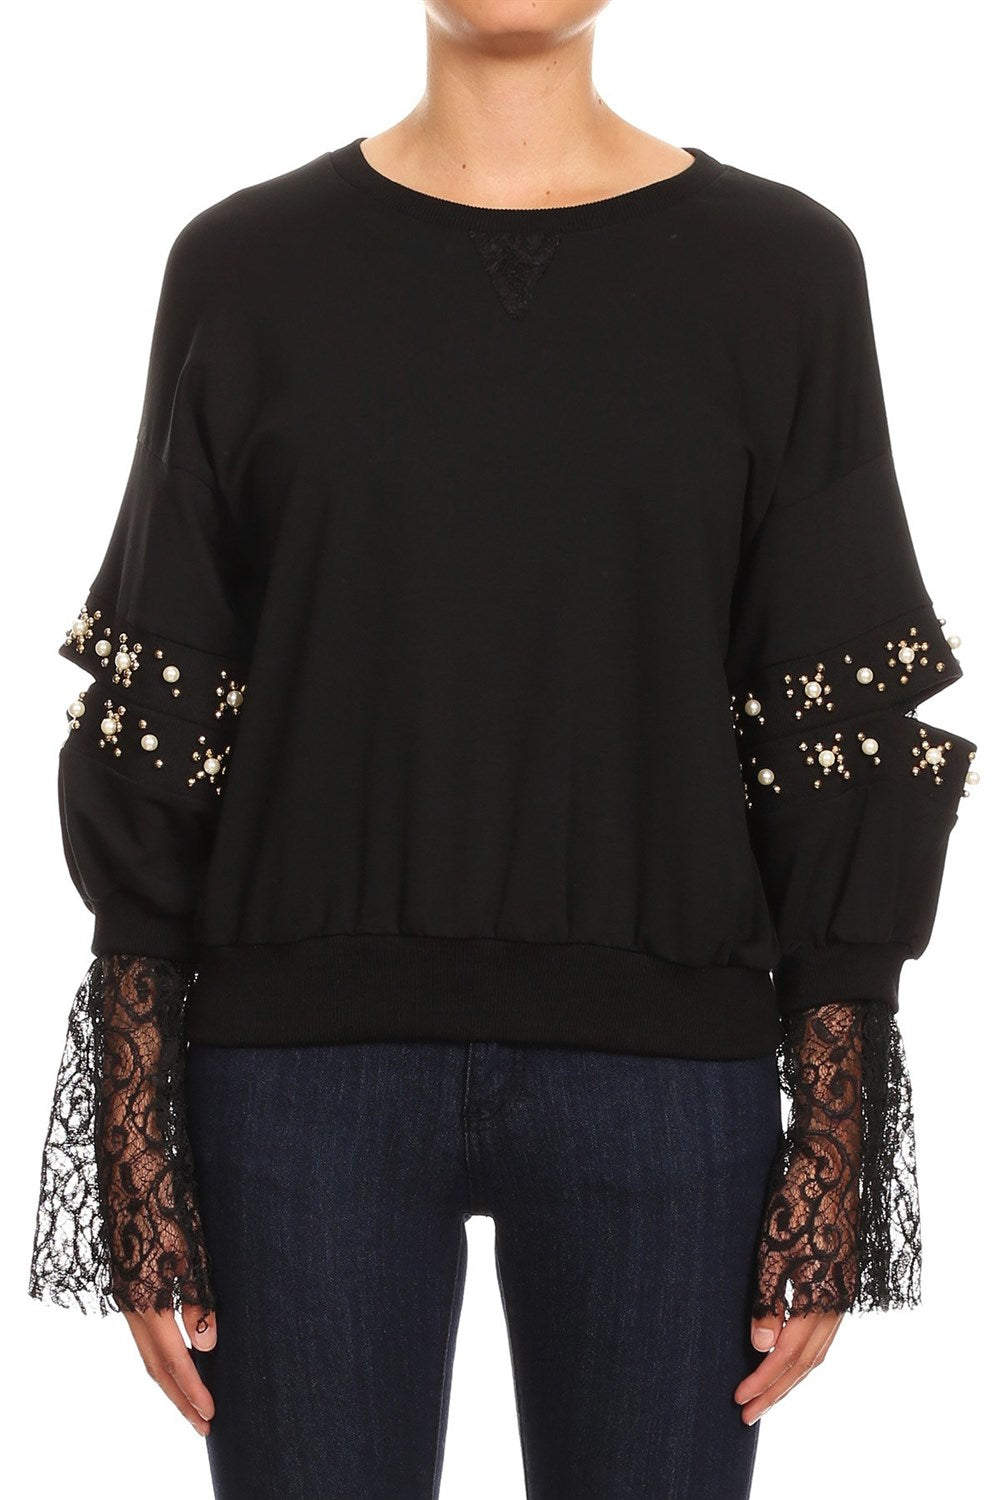 Fashion Pearl Gold Detailed Open Sleeve Black Lace Sweater